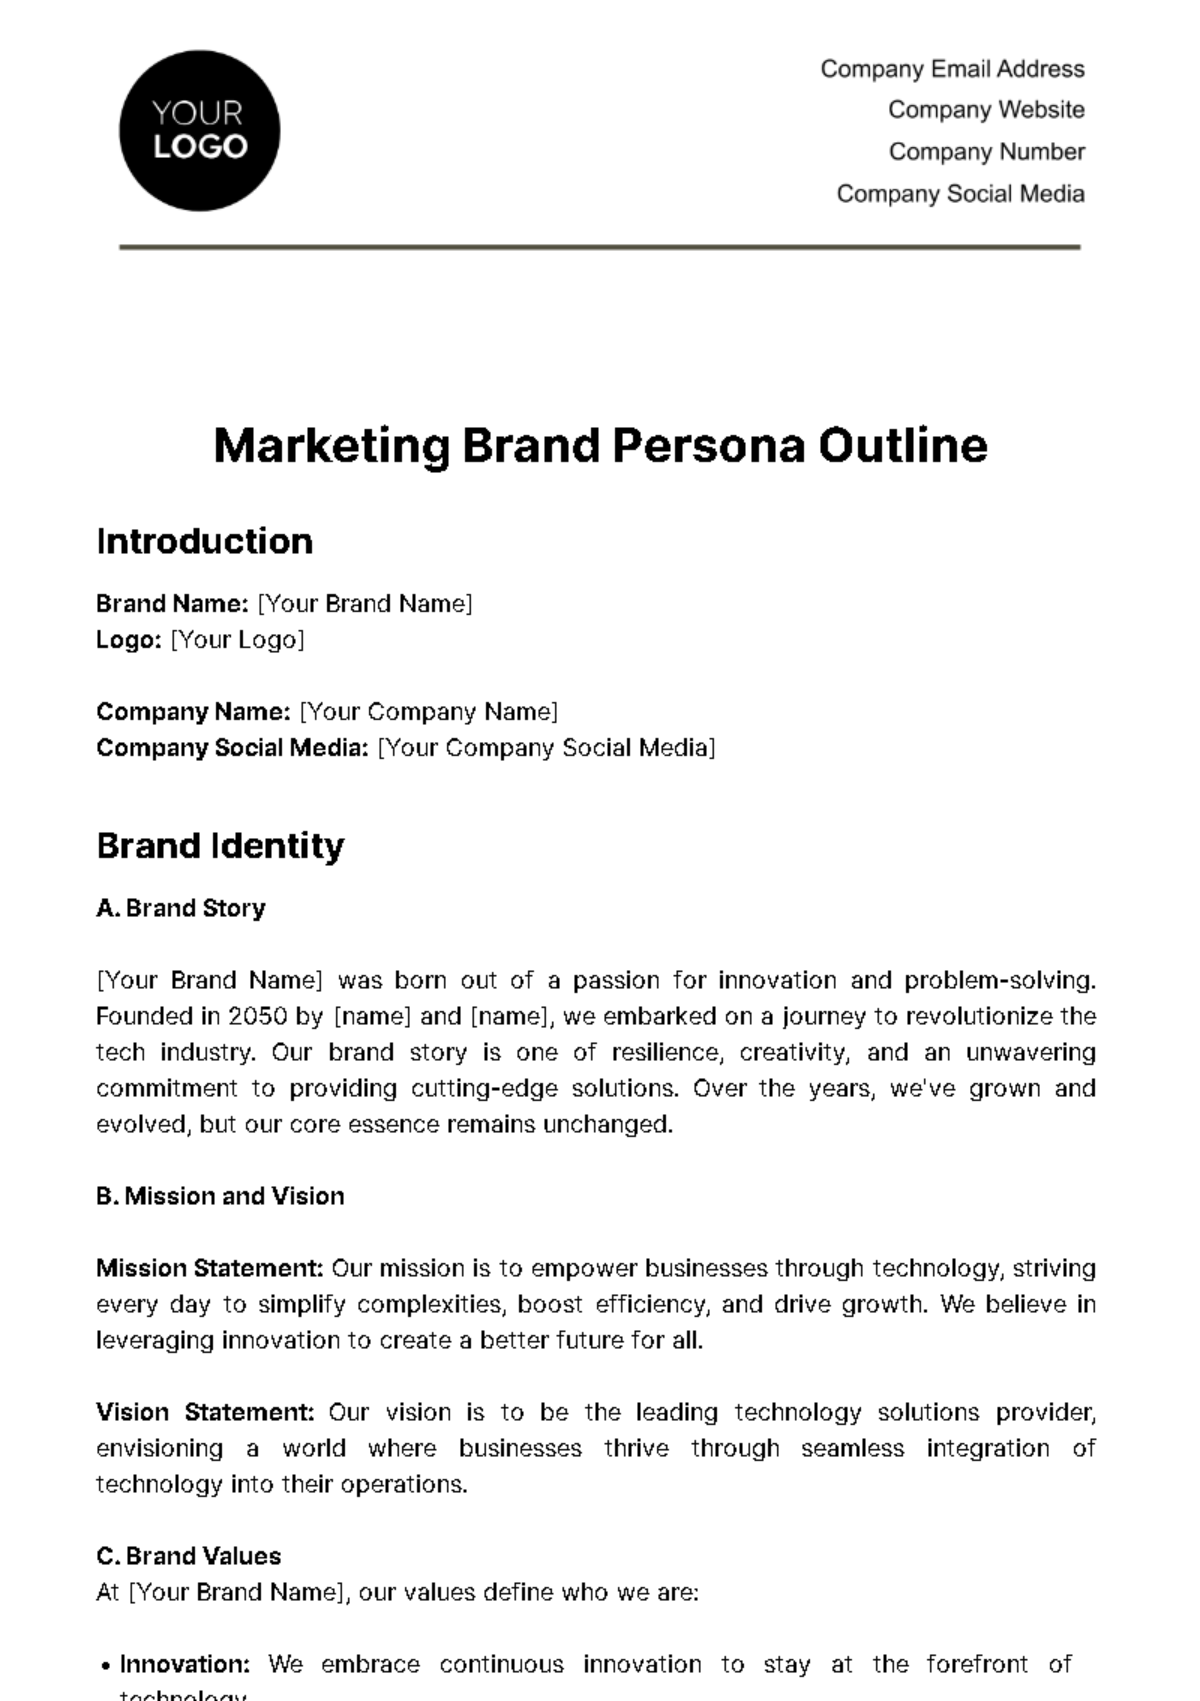 Marketing Brand Persona Outline Template